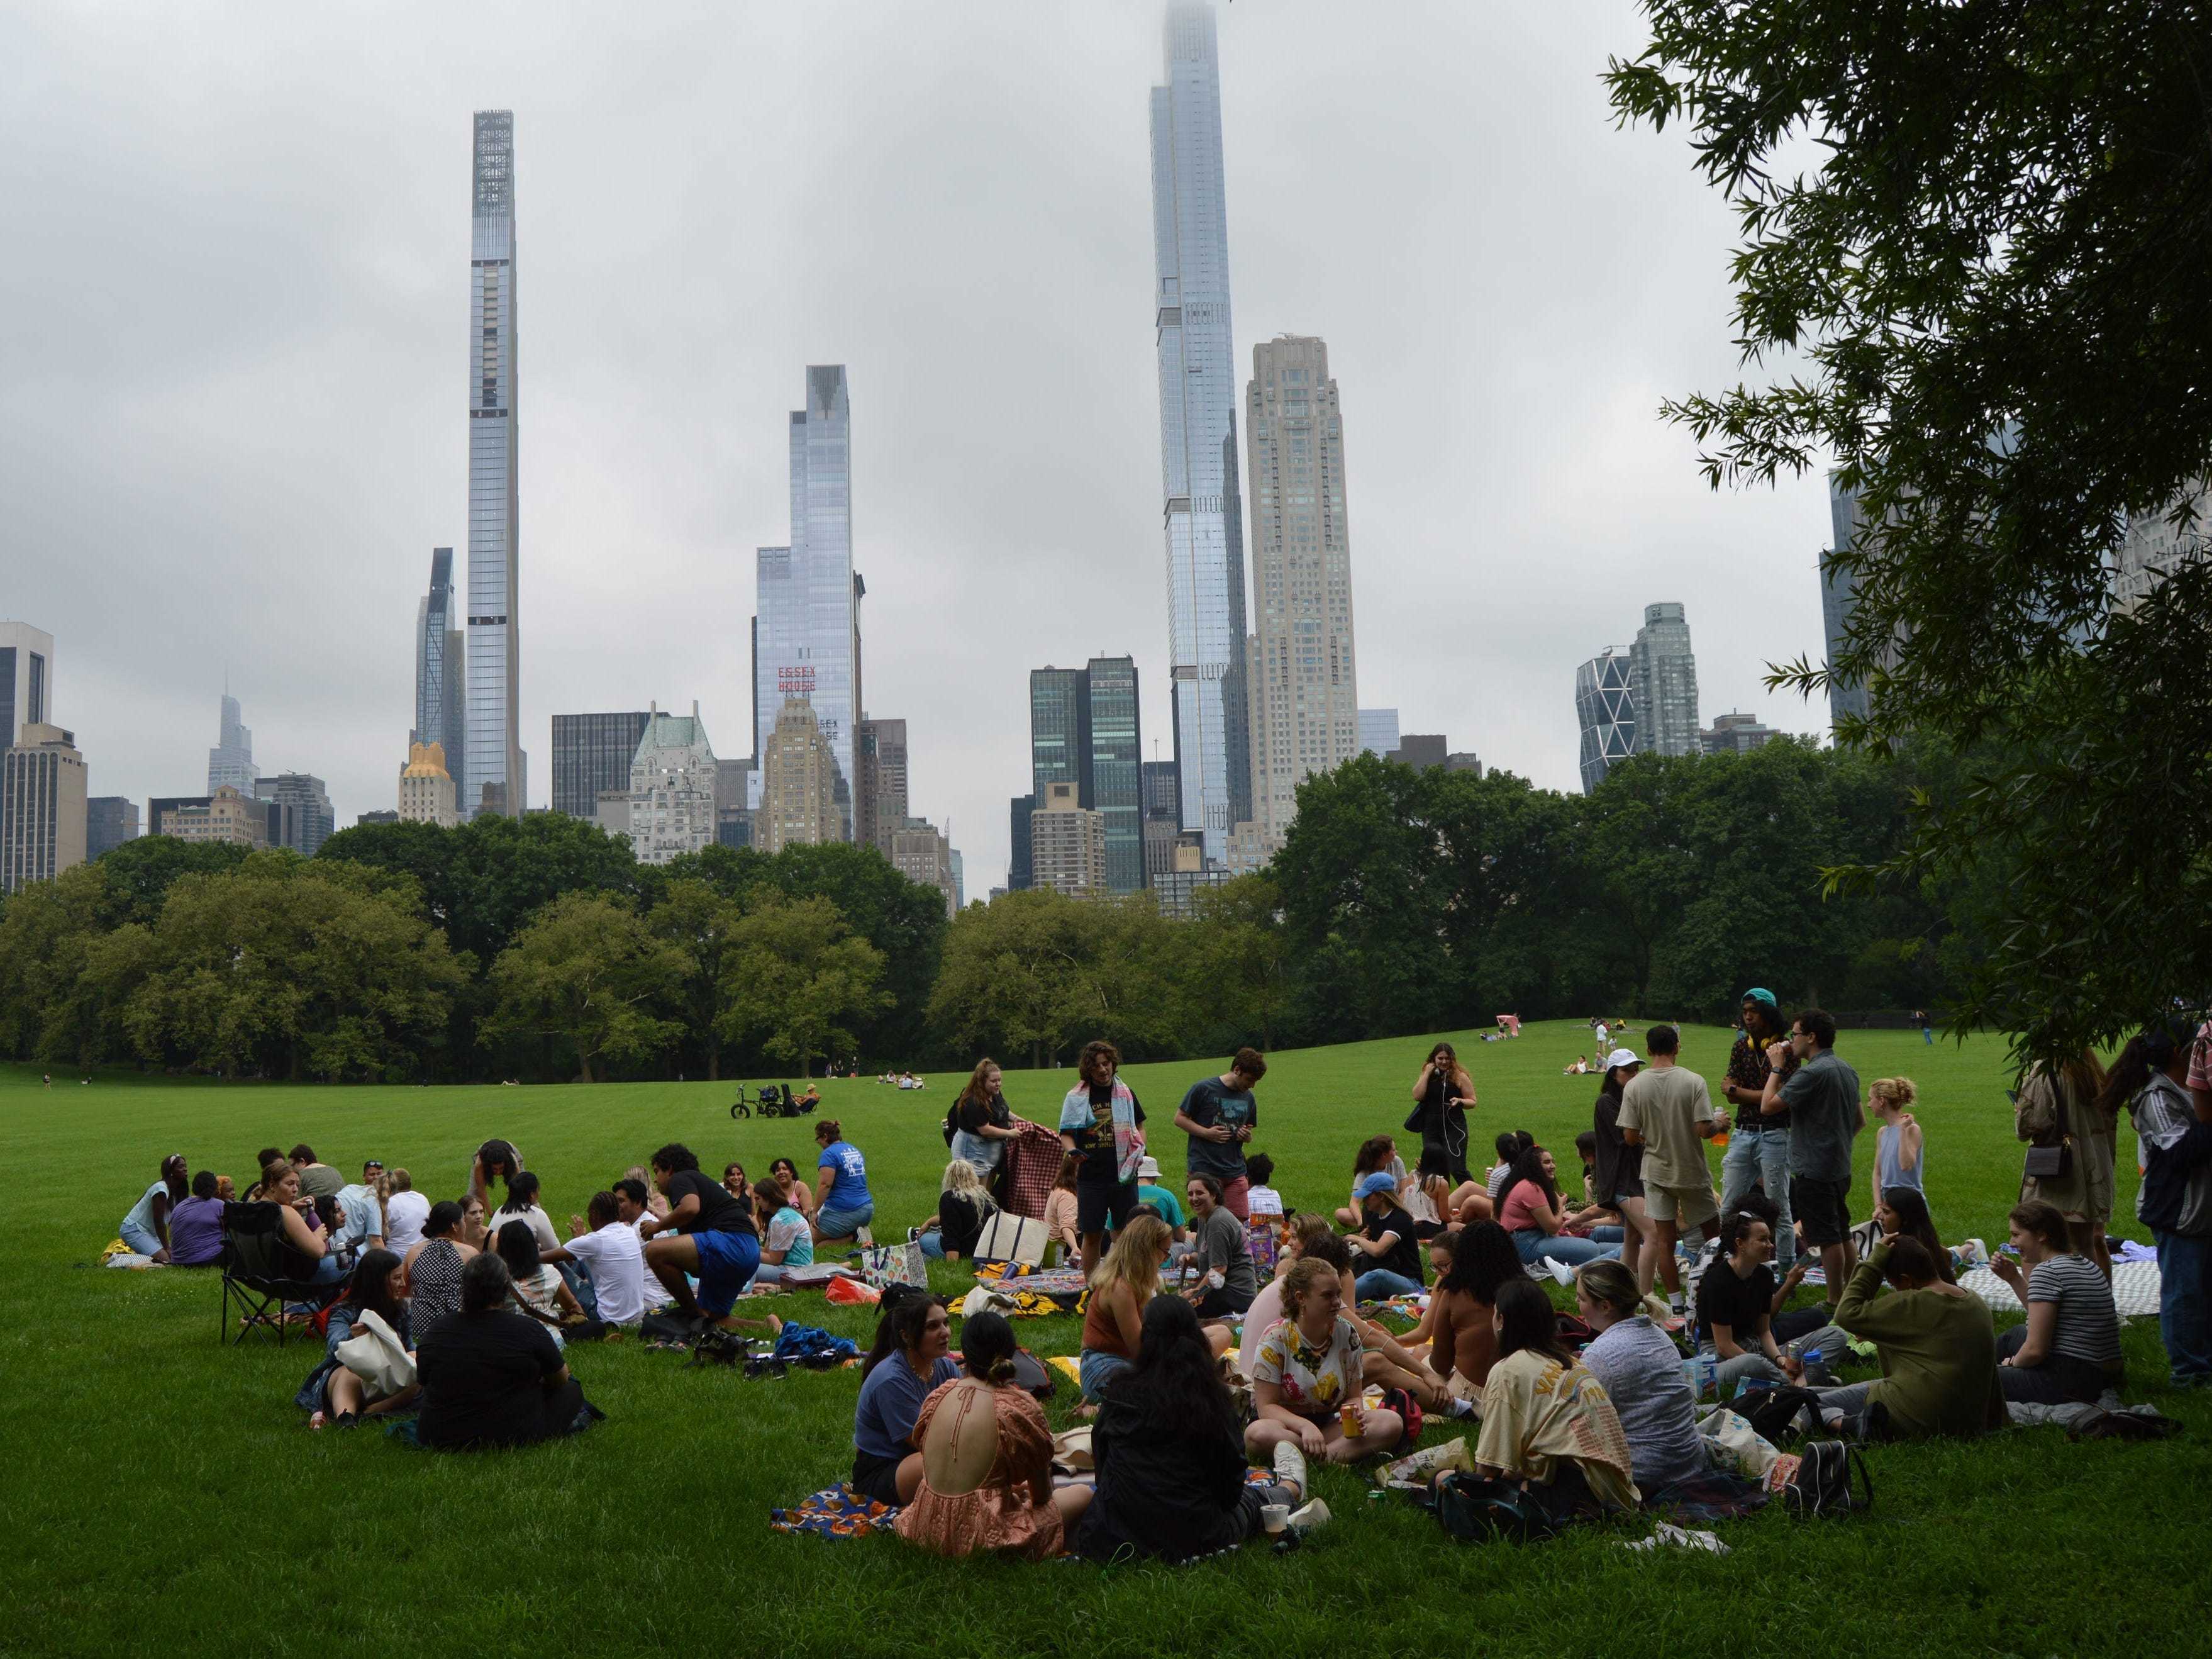 Dozens of people sit on the grass chatting in Central Park, with New York City skyscrapers behind them.